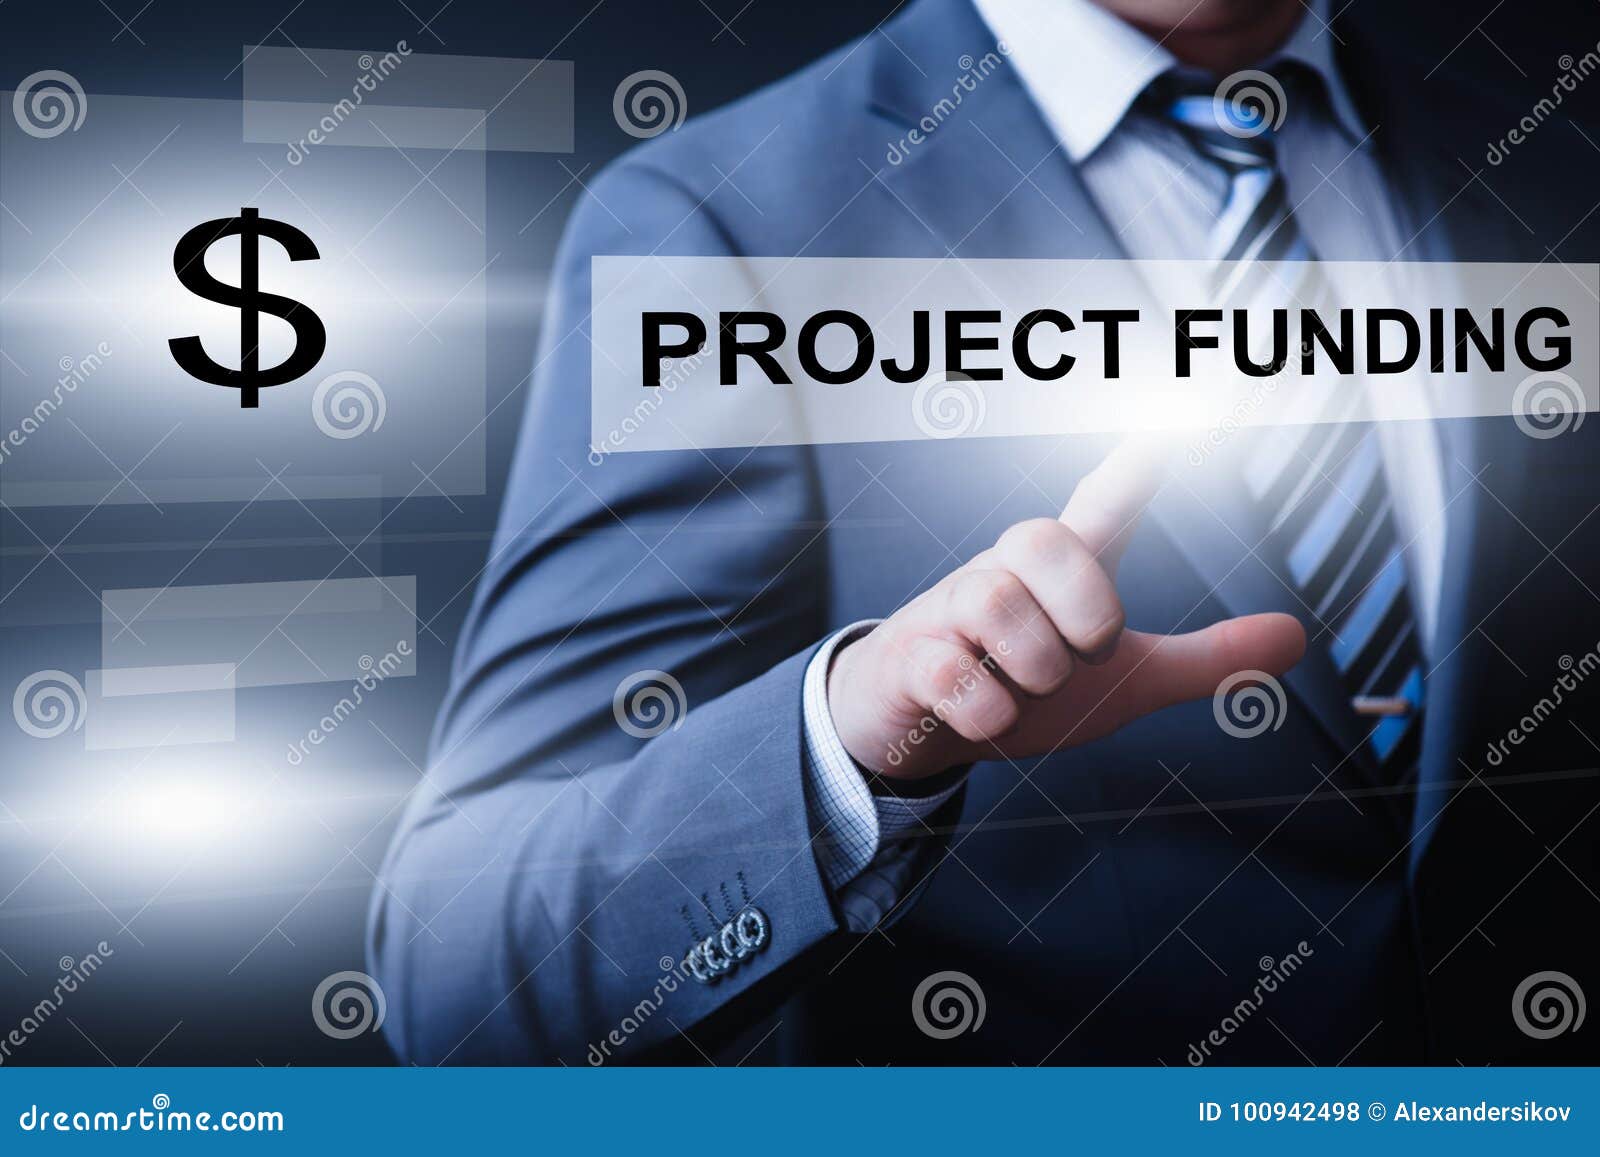 project funding start-up investment crowdfunding venture capital internet business technology concept